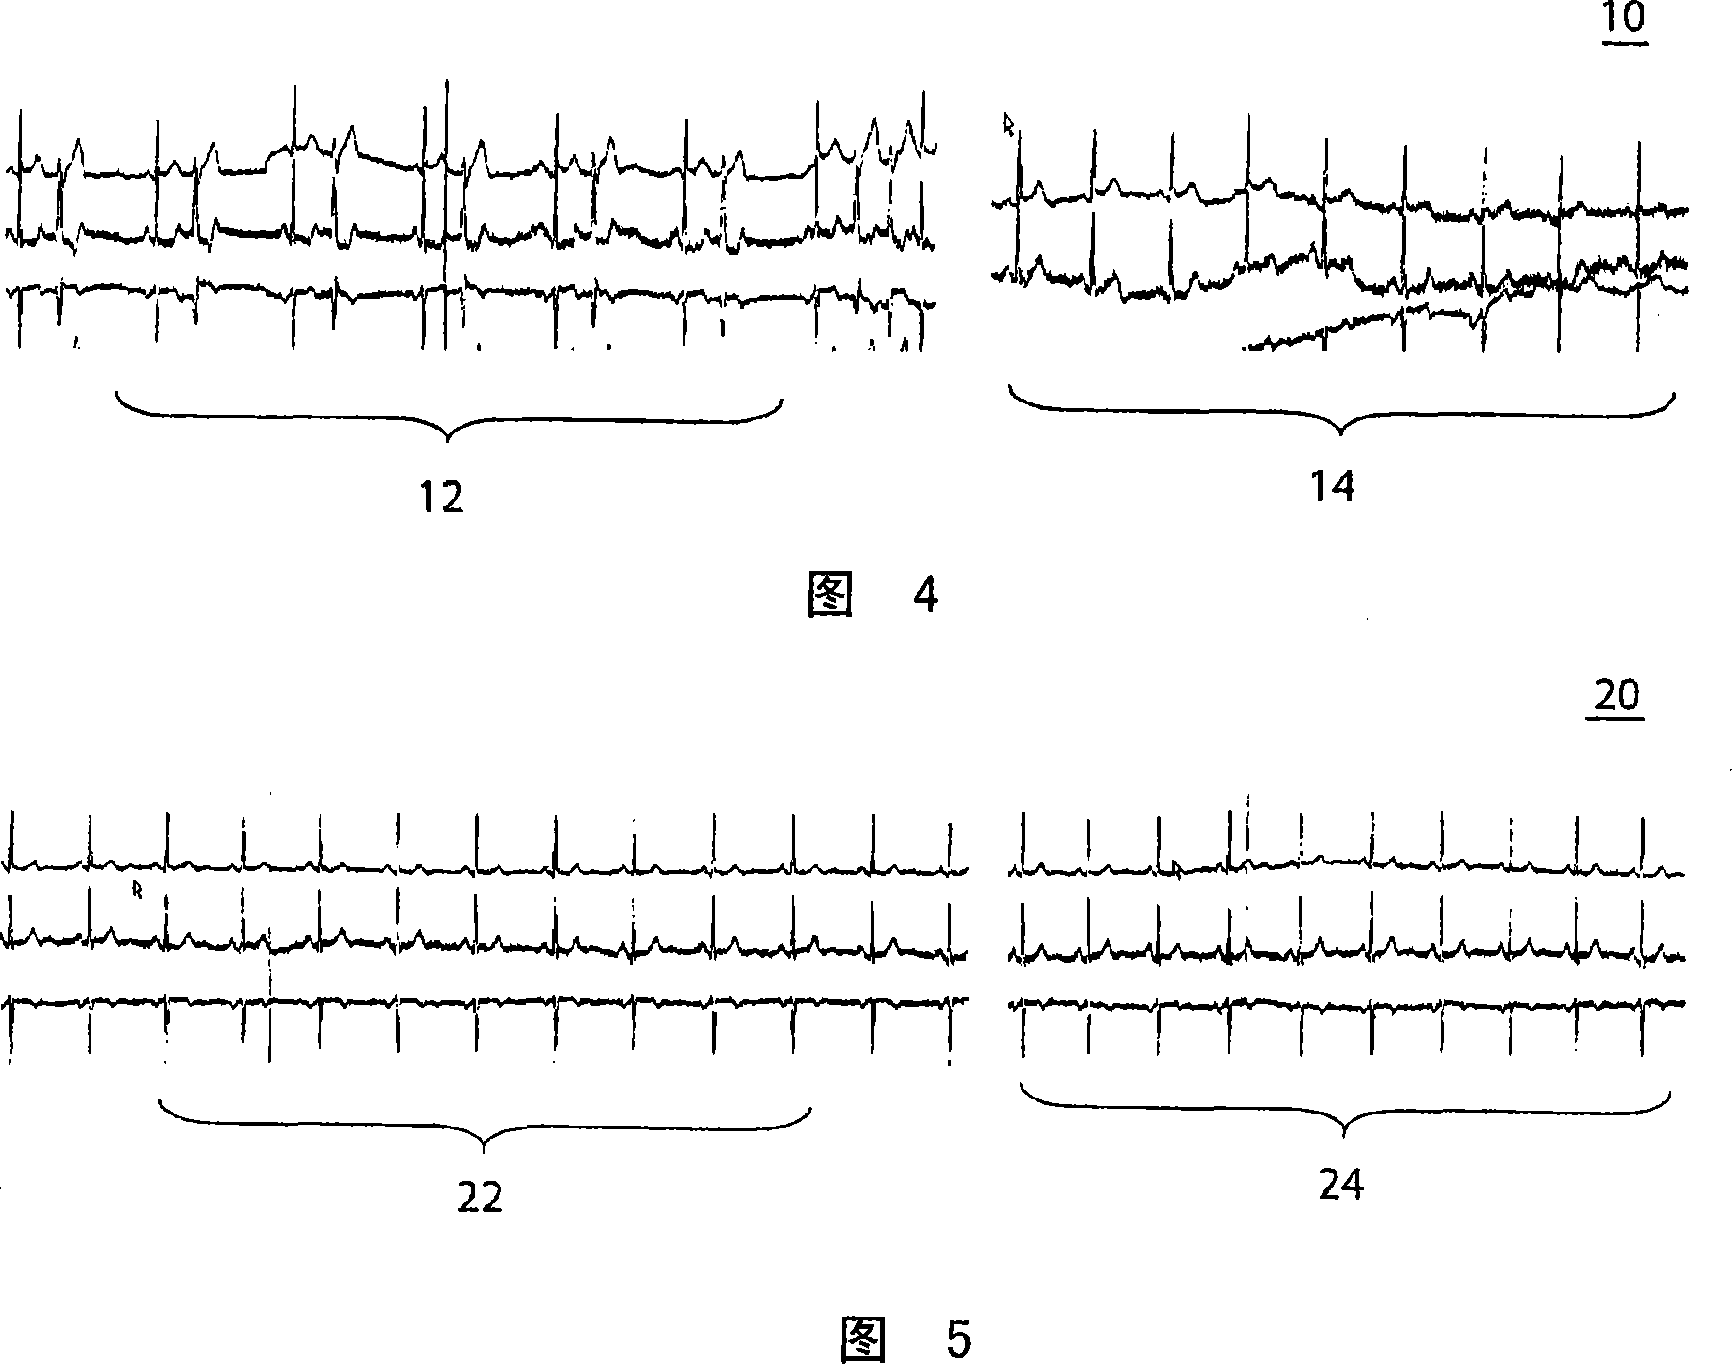 Pre-conditioned ECG system and method